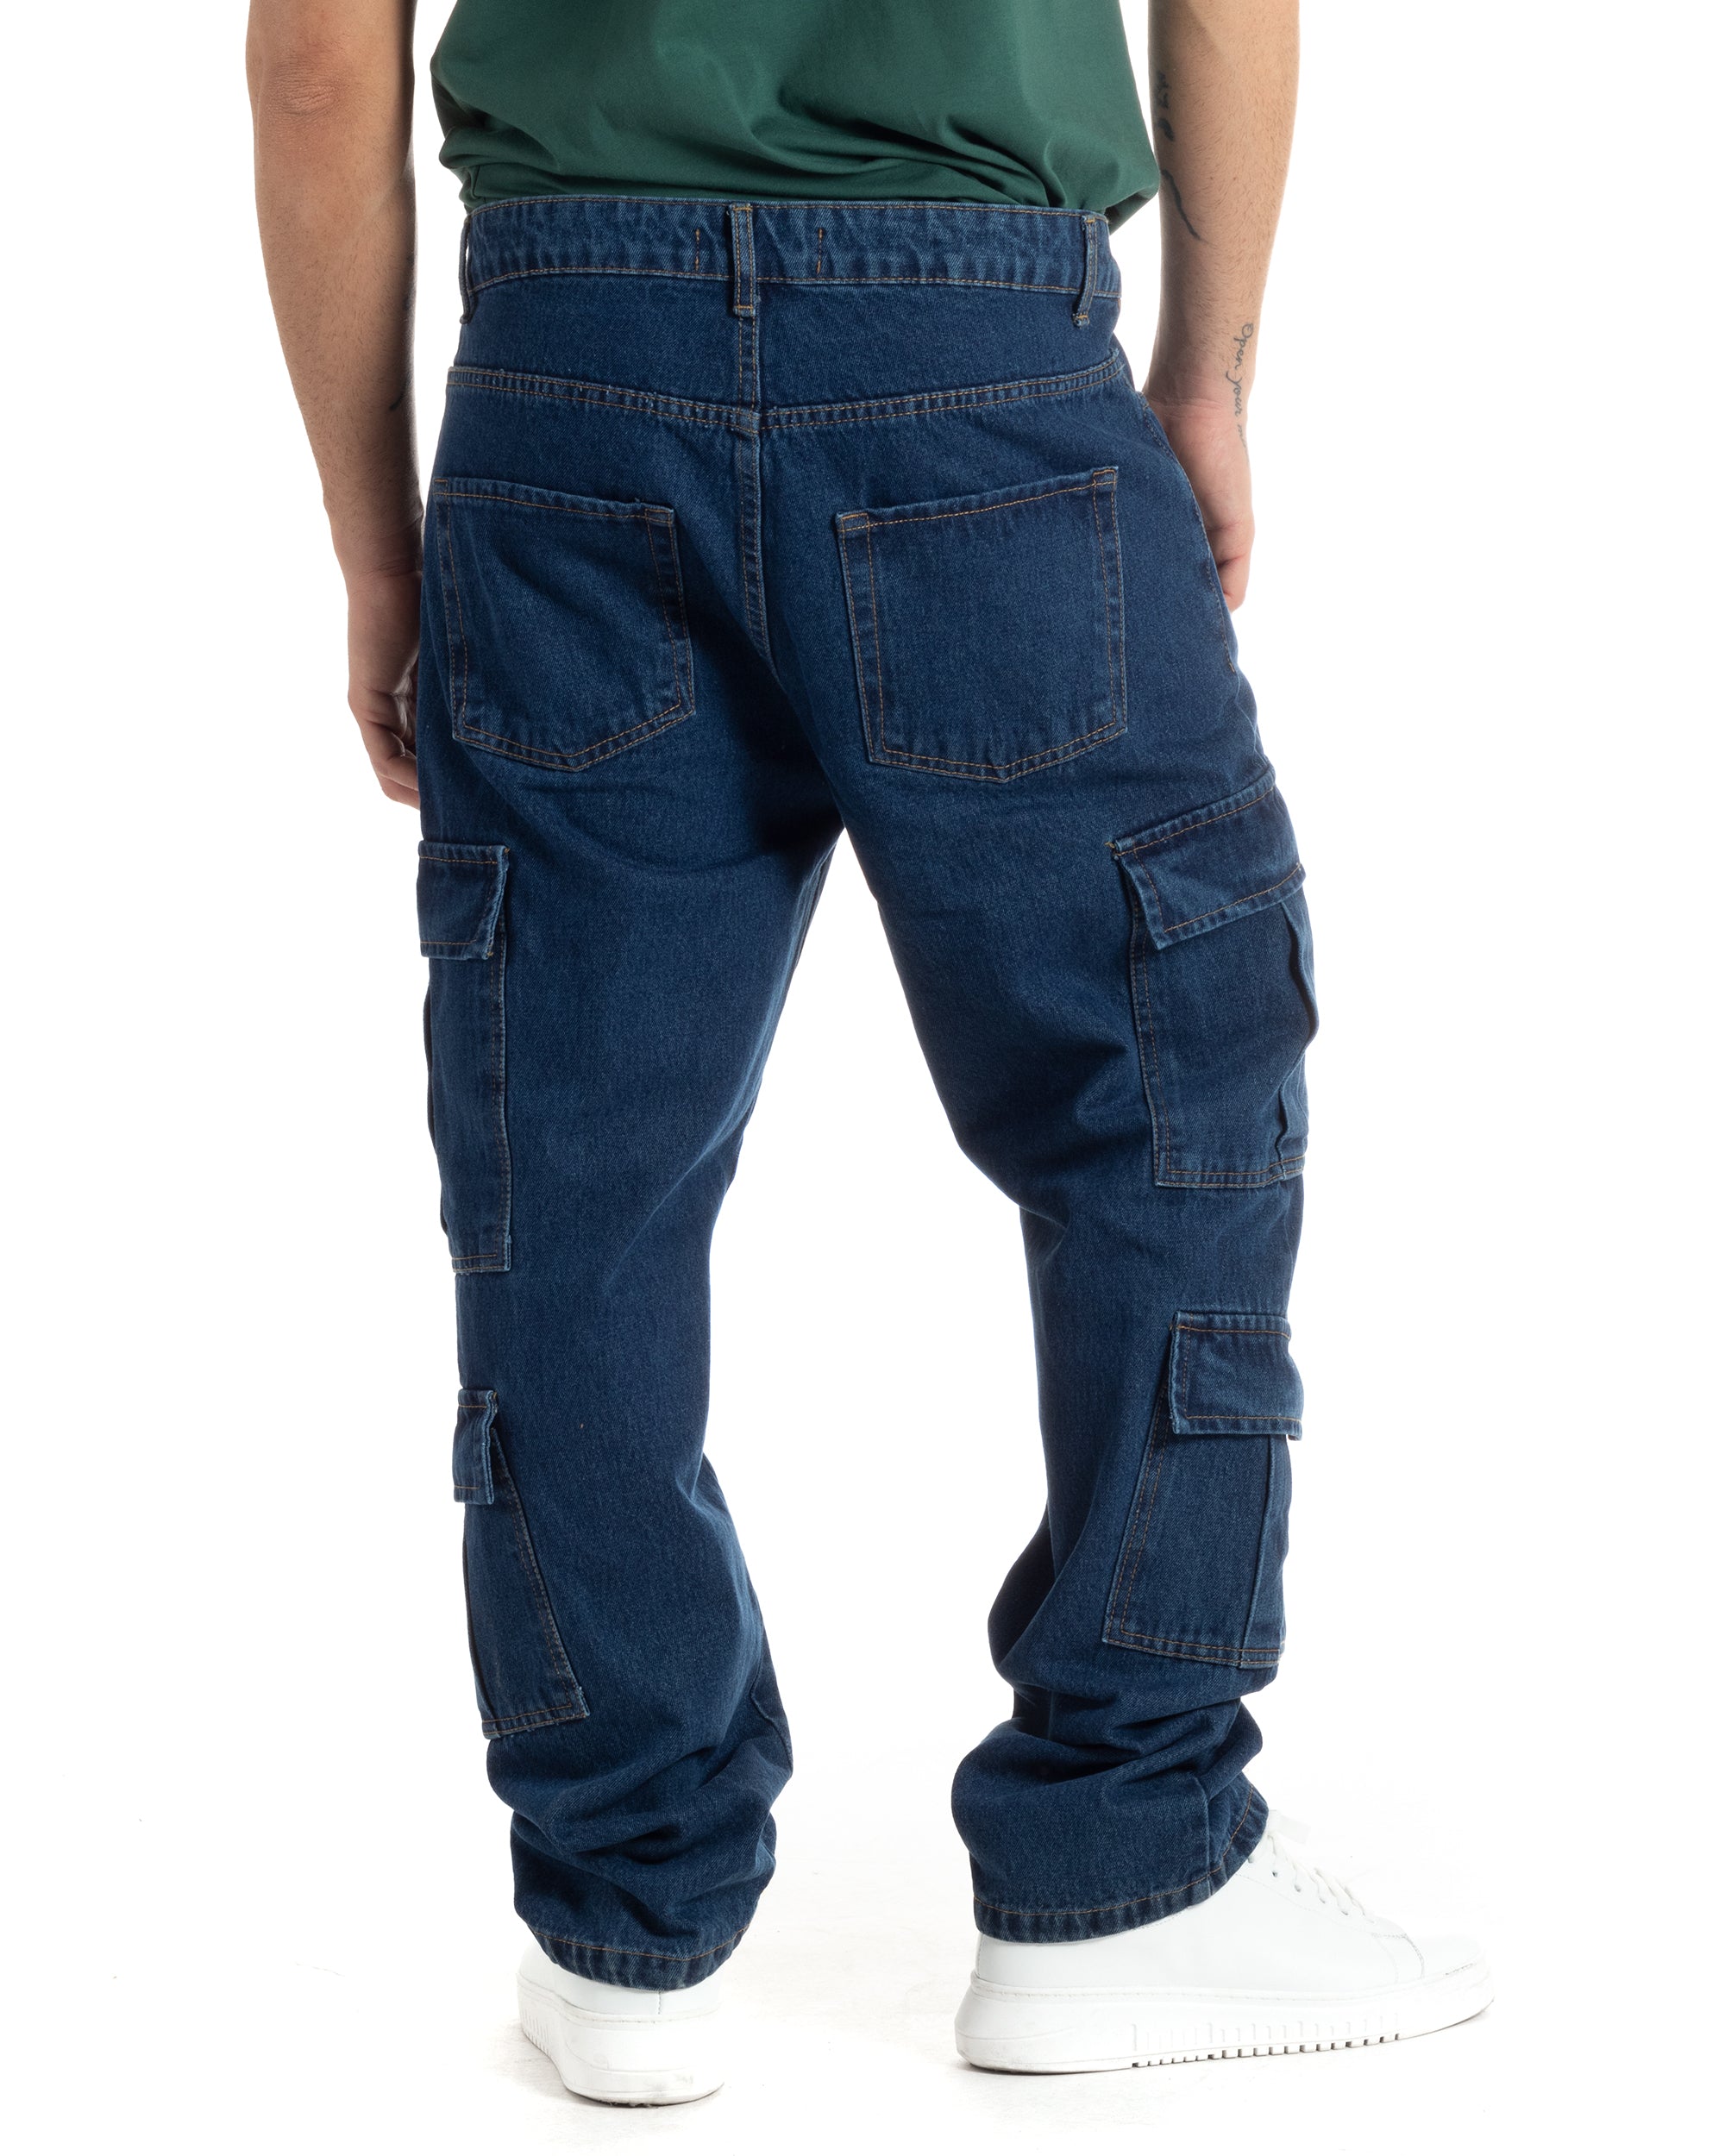 Men's Jeans Cargo Straight Fit Light Denim Casual Pants GIOSAL-P5668A